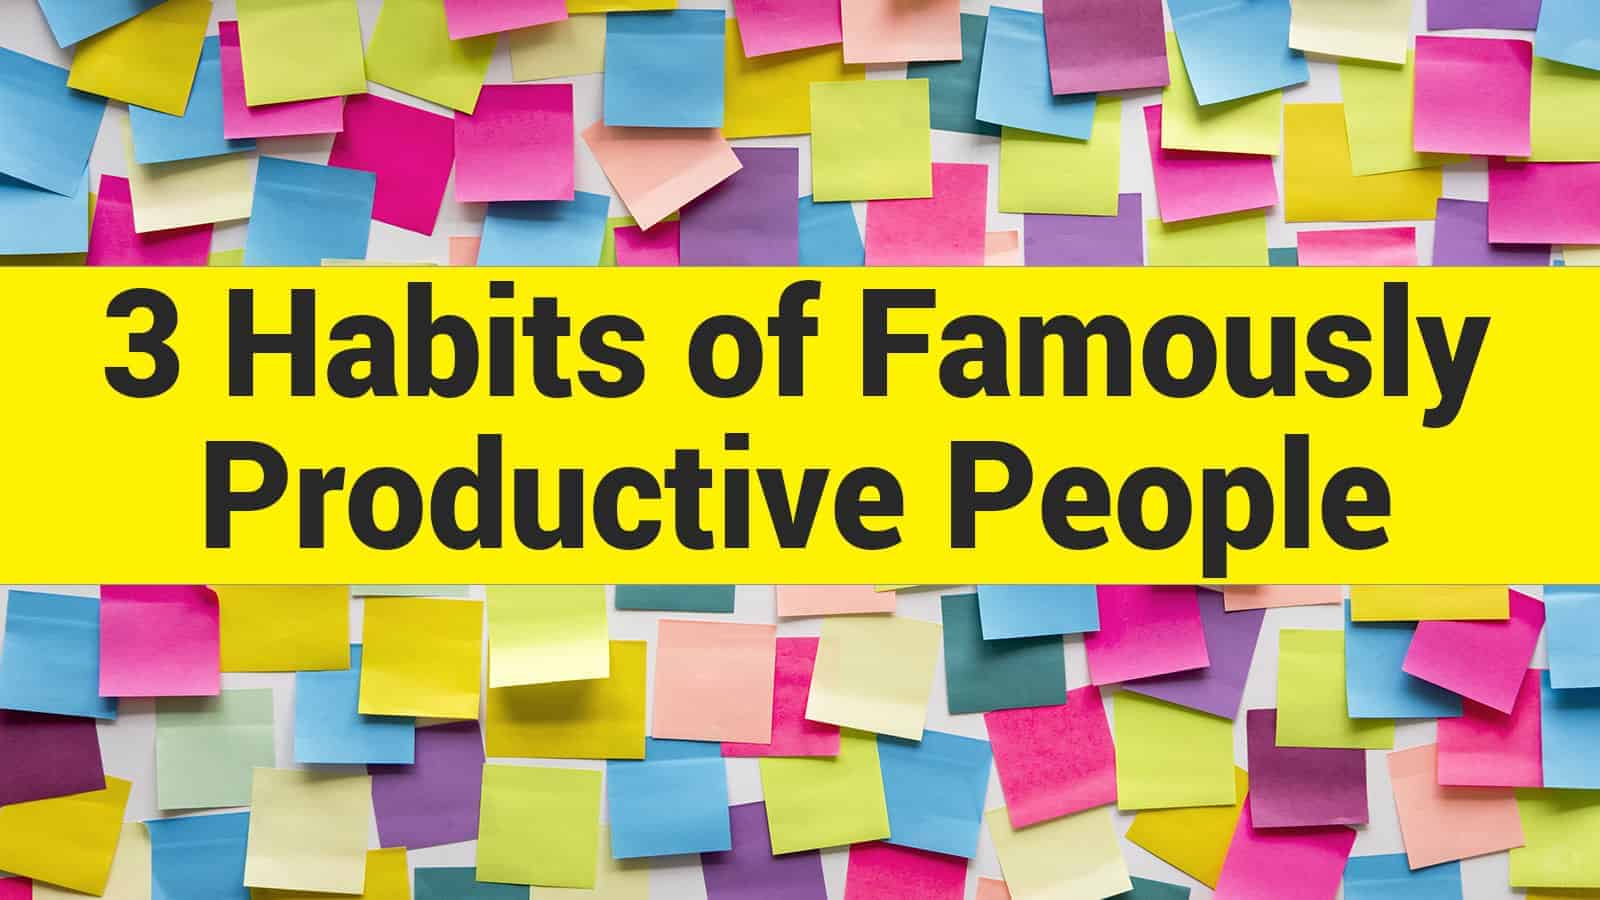 3 Habits of Famously Productive People